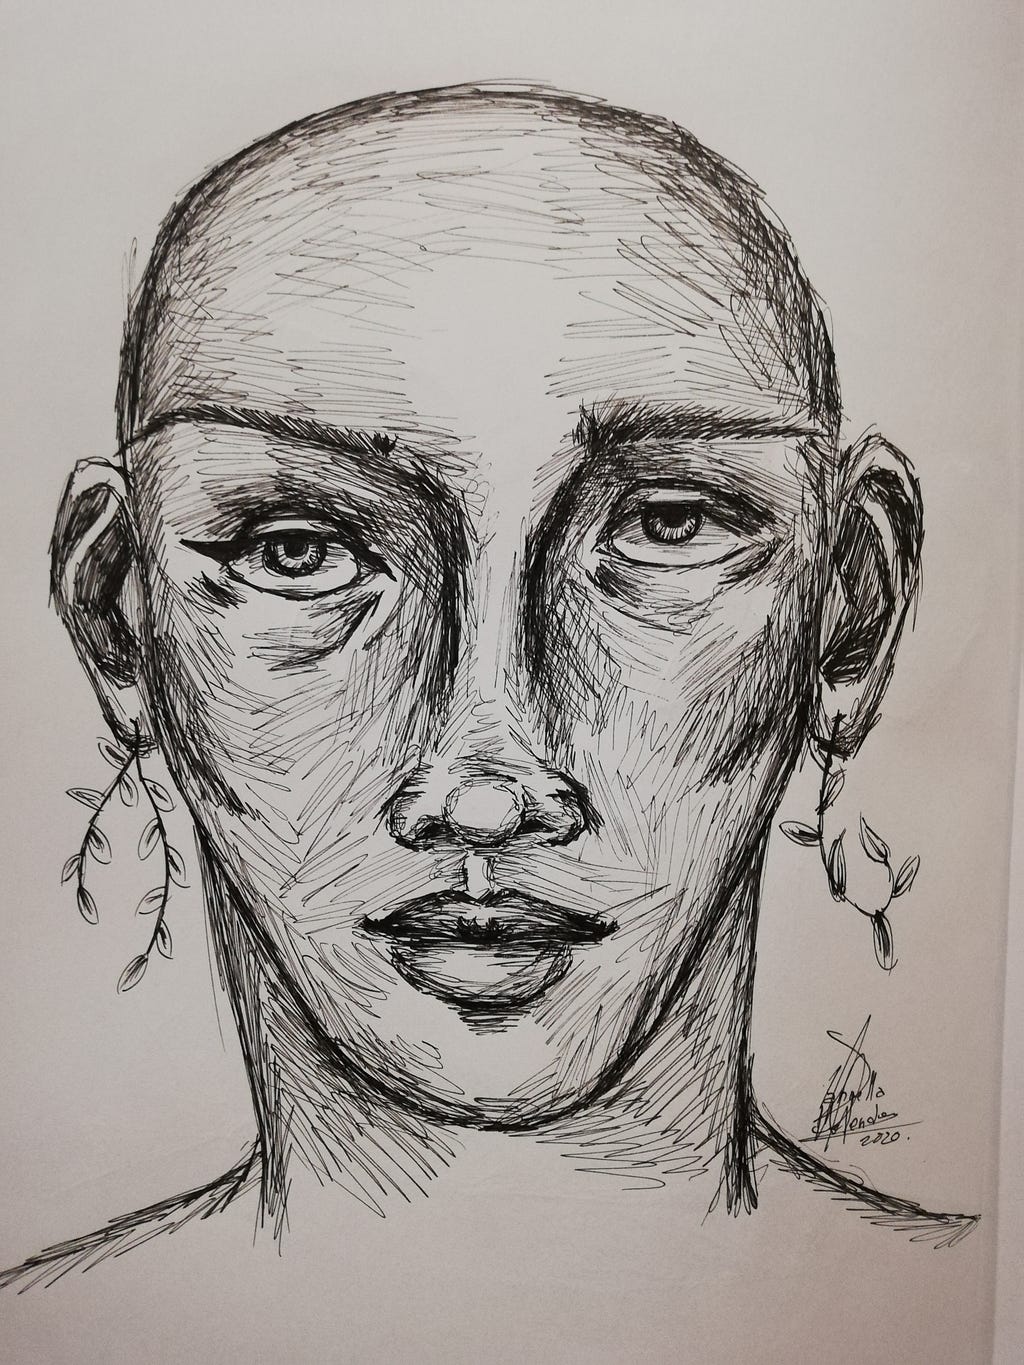 Portrait, a bald person with long nose and tired eyes. The piece is black and white and was made with pen and the face has been shaded with crosshatching and soft lines. At the bottom right there is a signature with a “2020”, signifying the year the artowk was made.